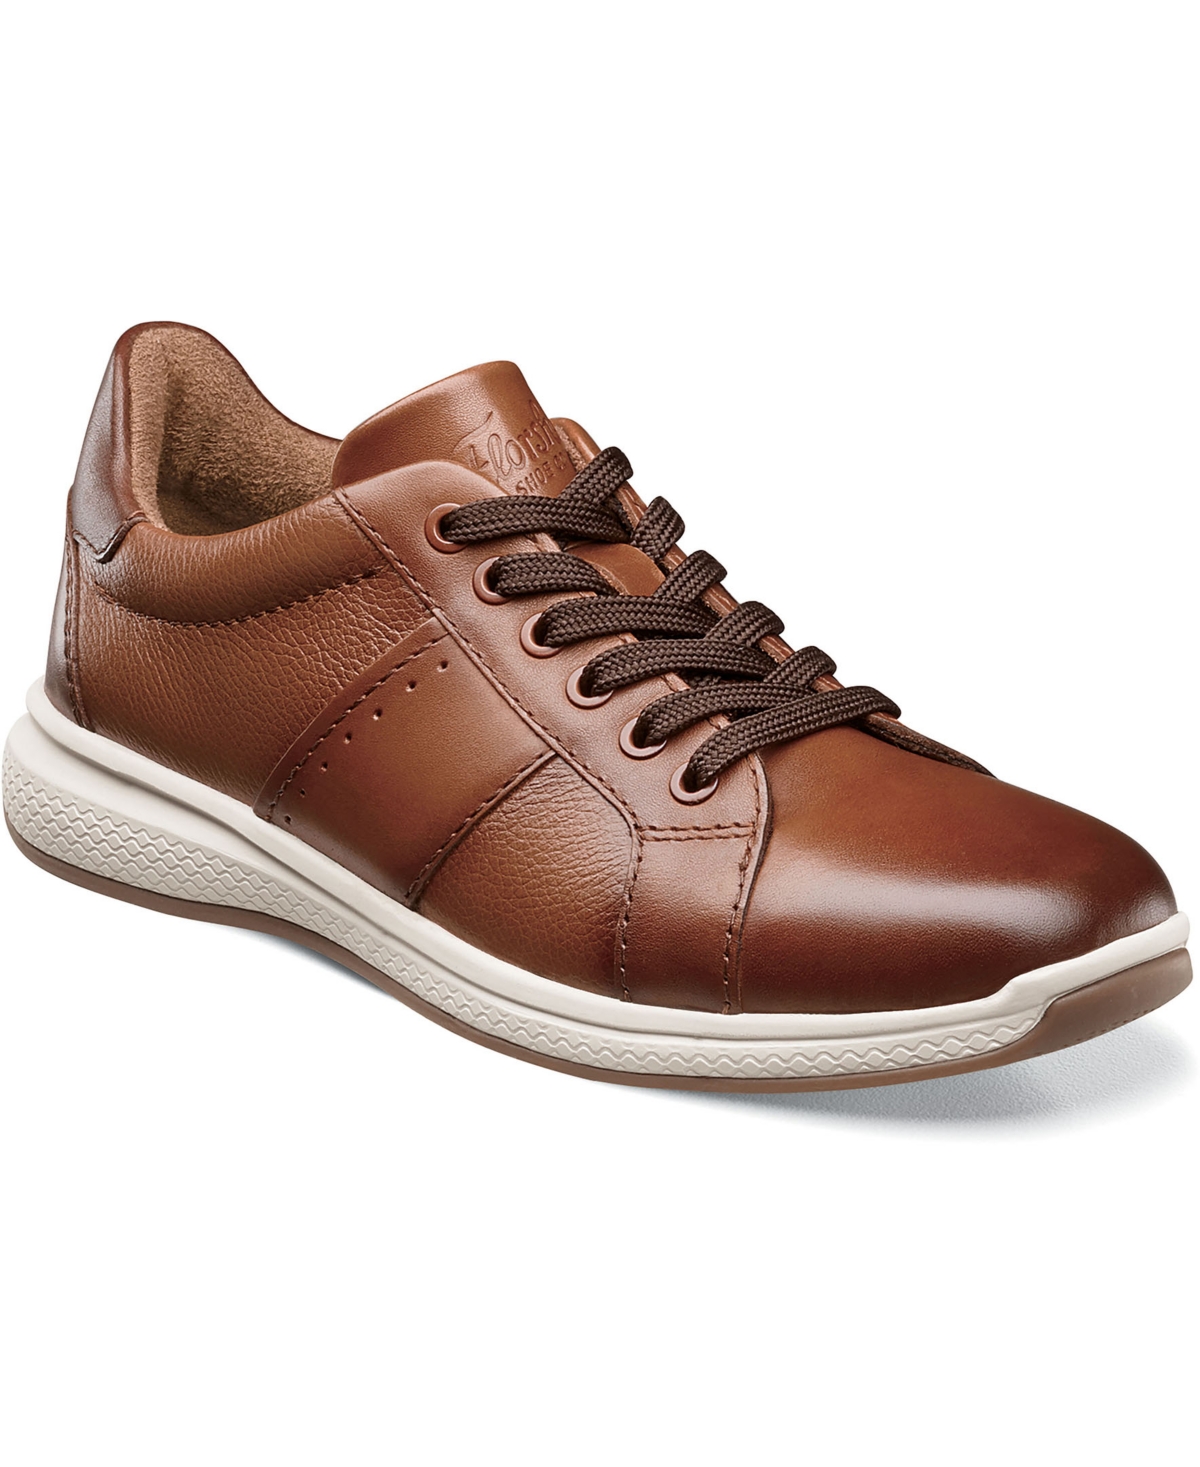 Shop Florsheim Toddler Boys Great Lakes Lace To Toe Jr. Oxford Shoes In Cognac